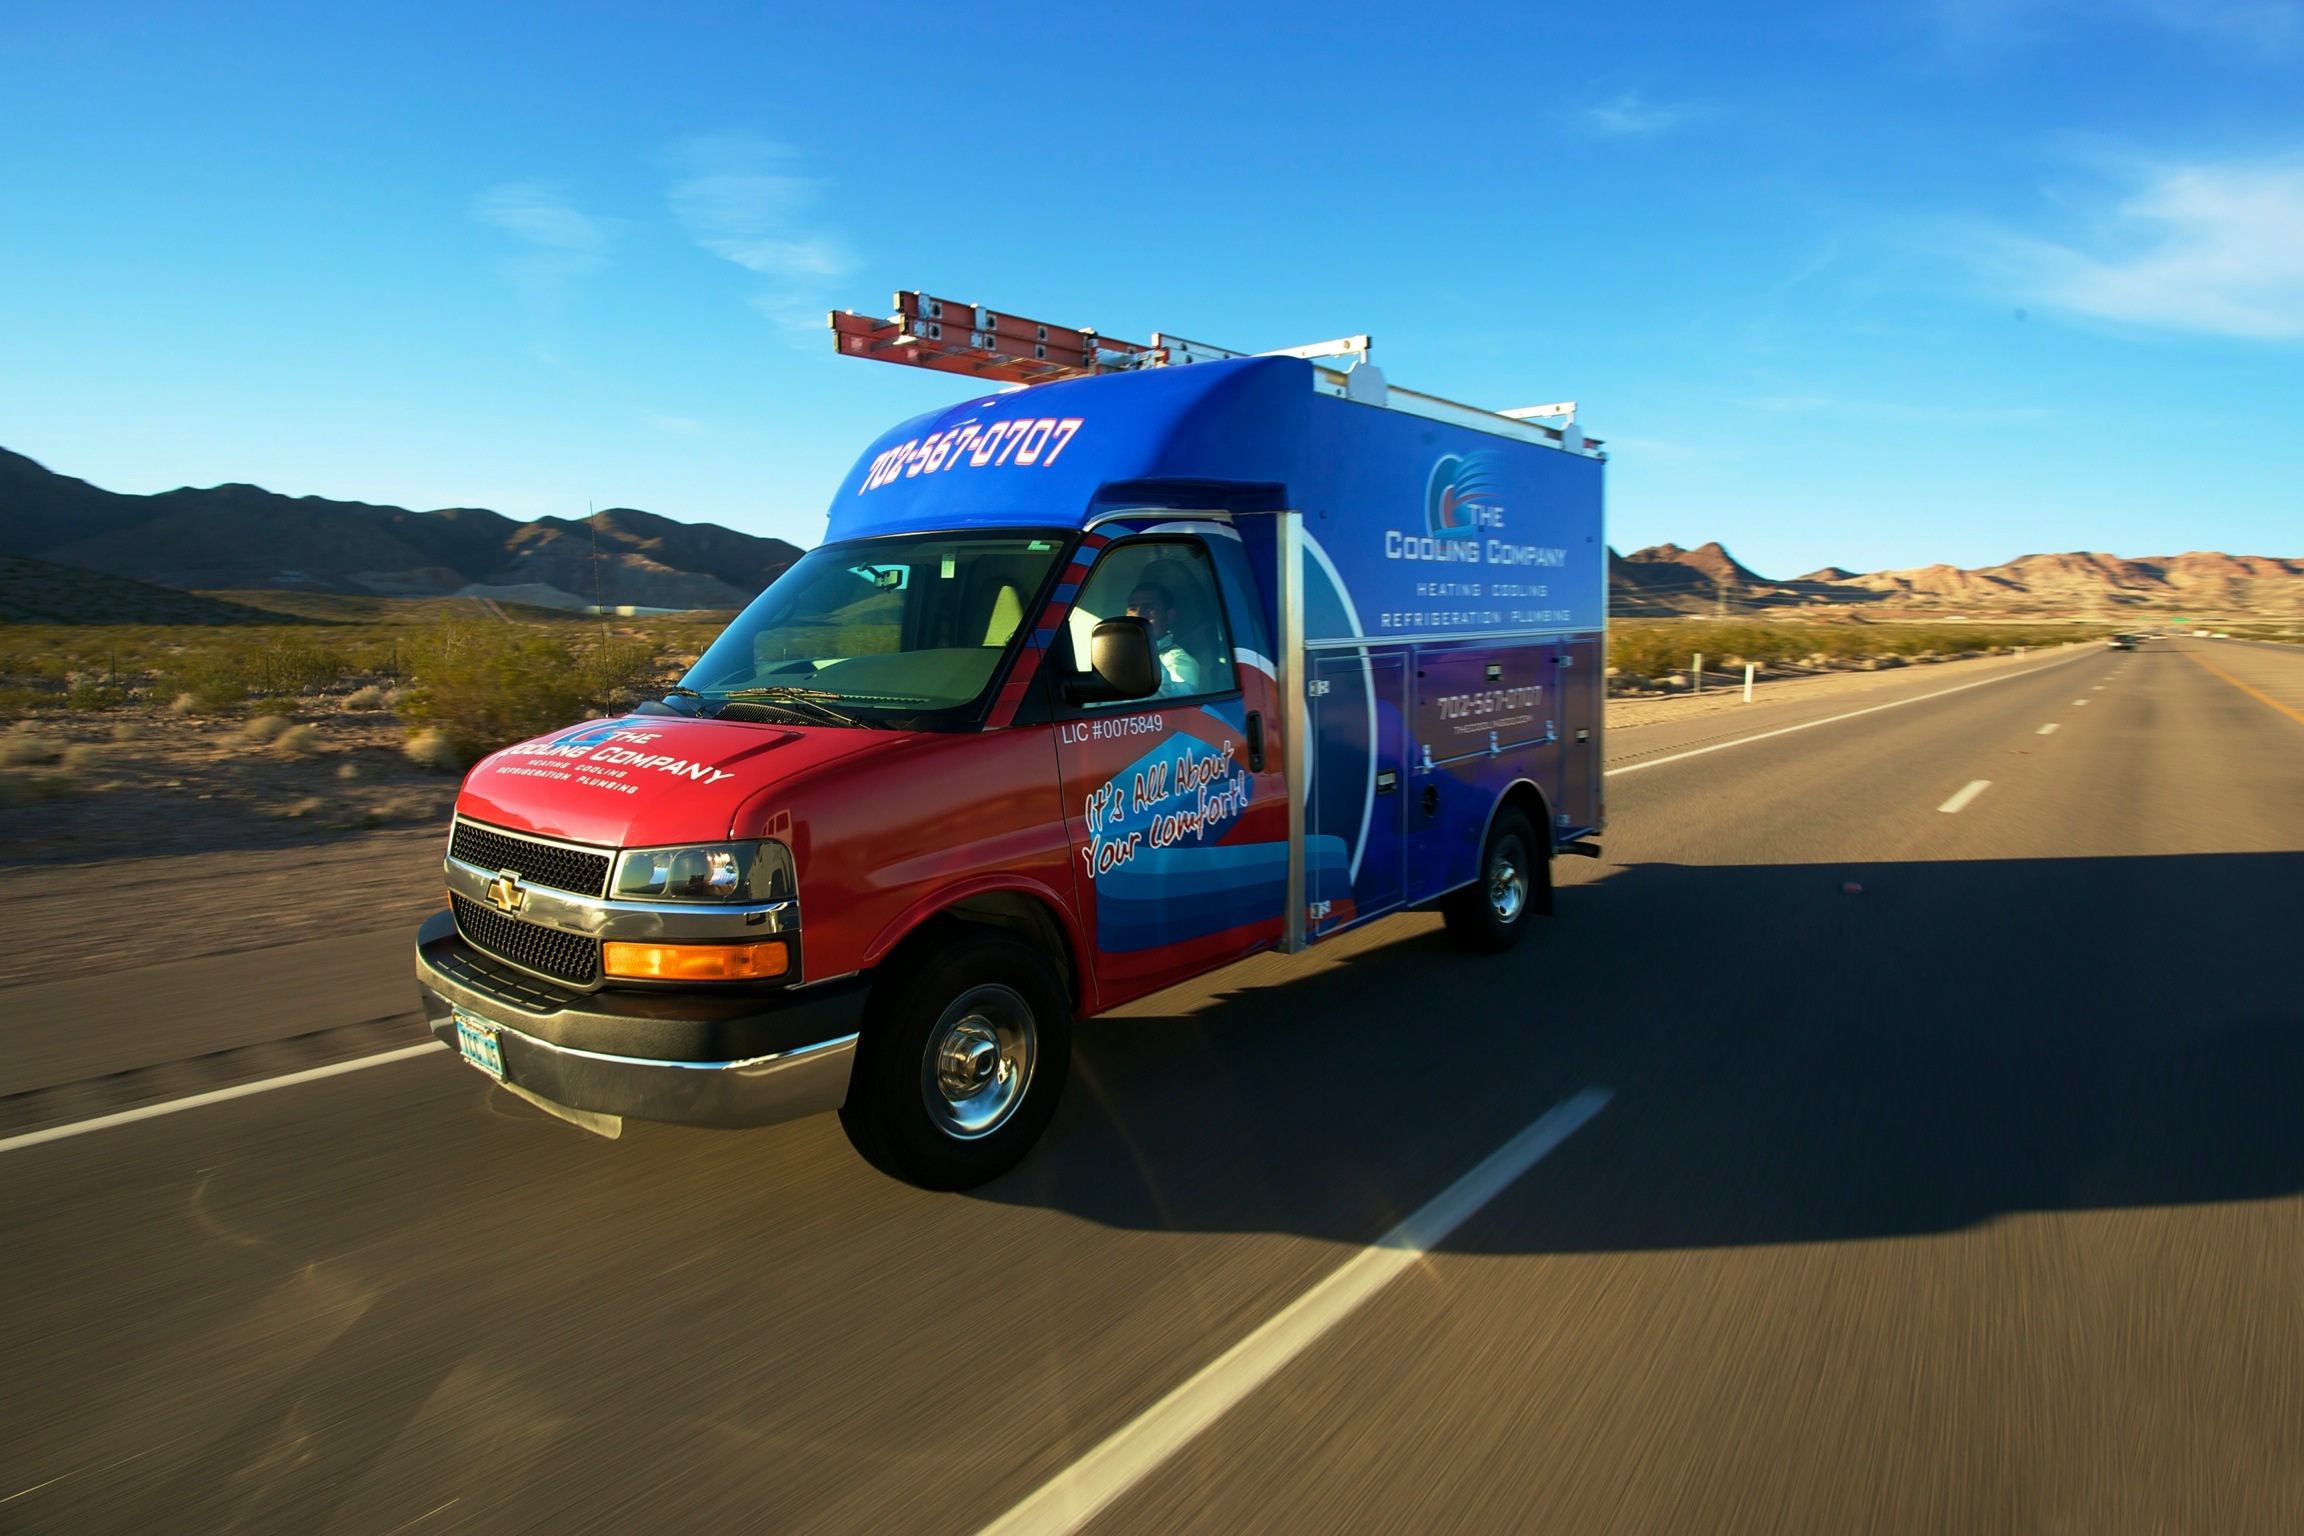 Heating, Cooling and Plumbing company in Las Vegas, NV